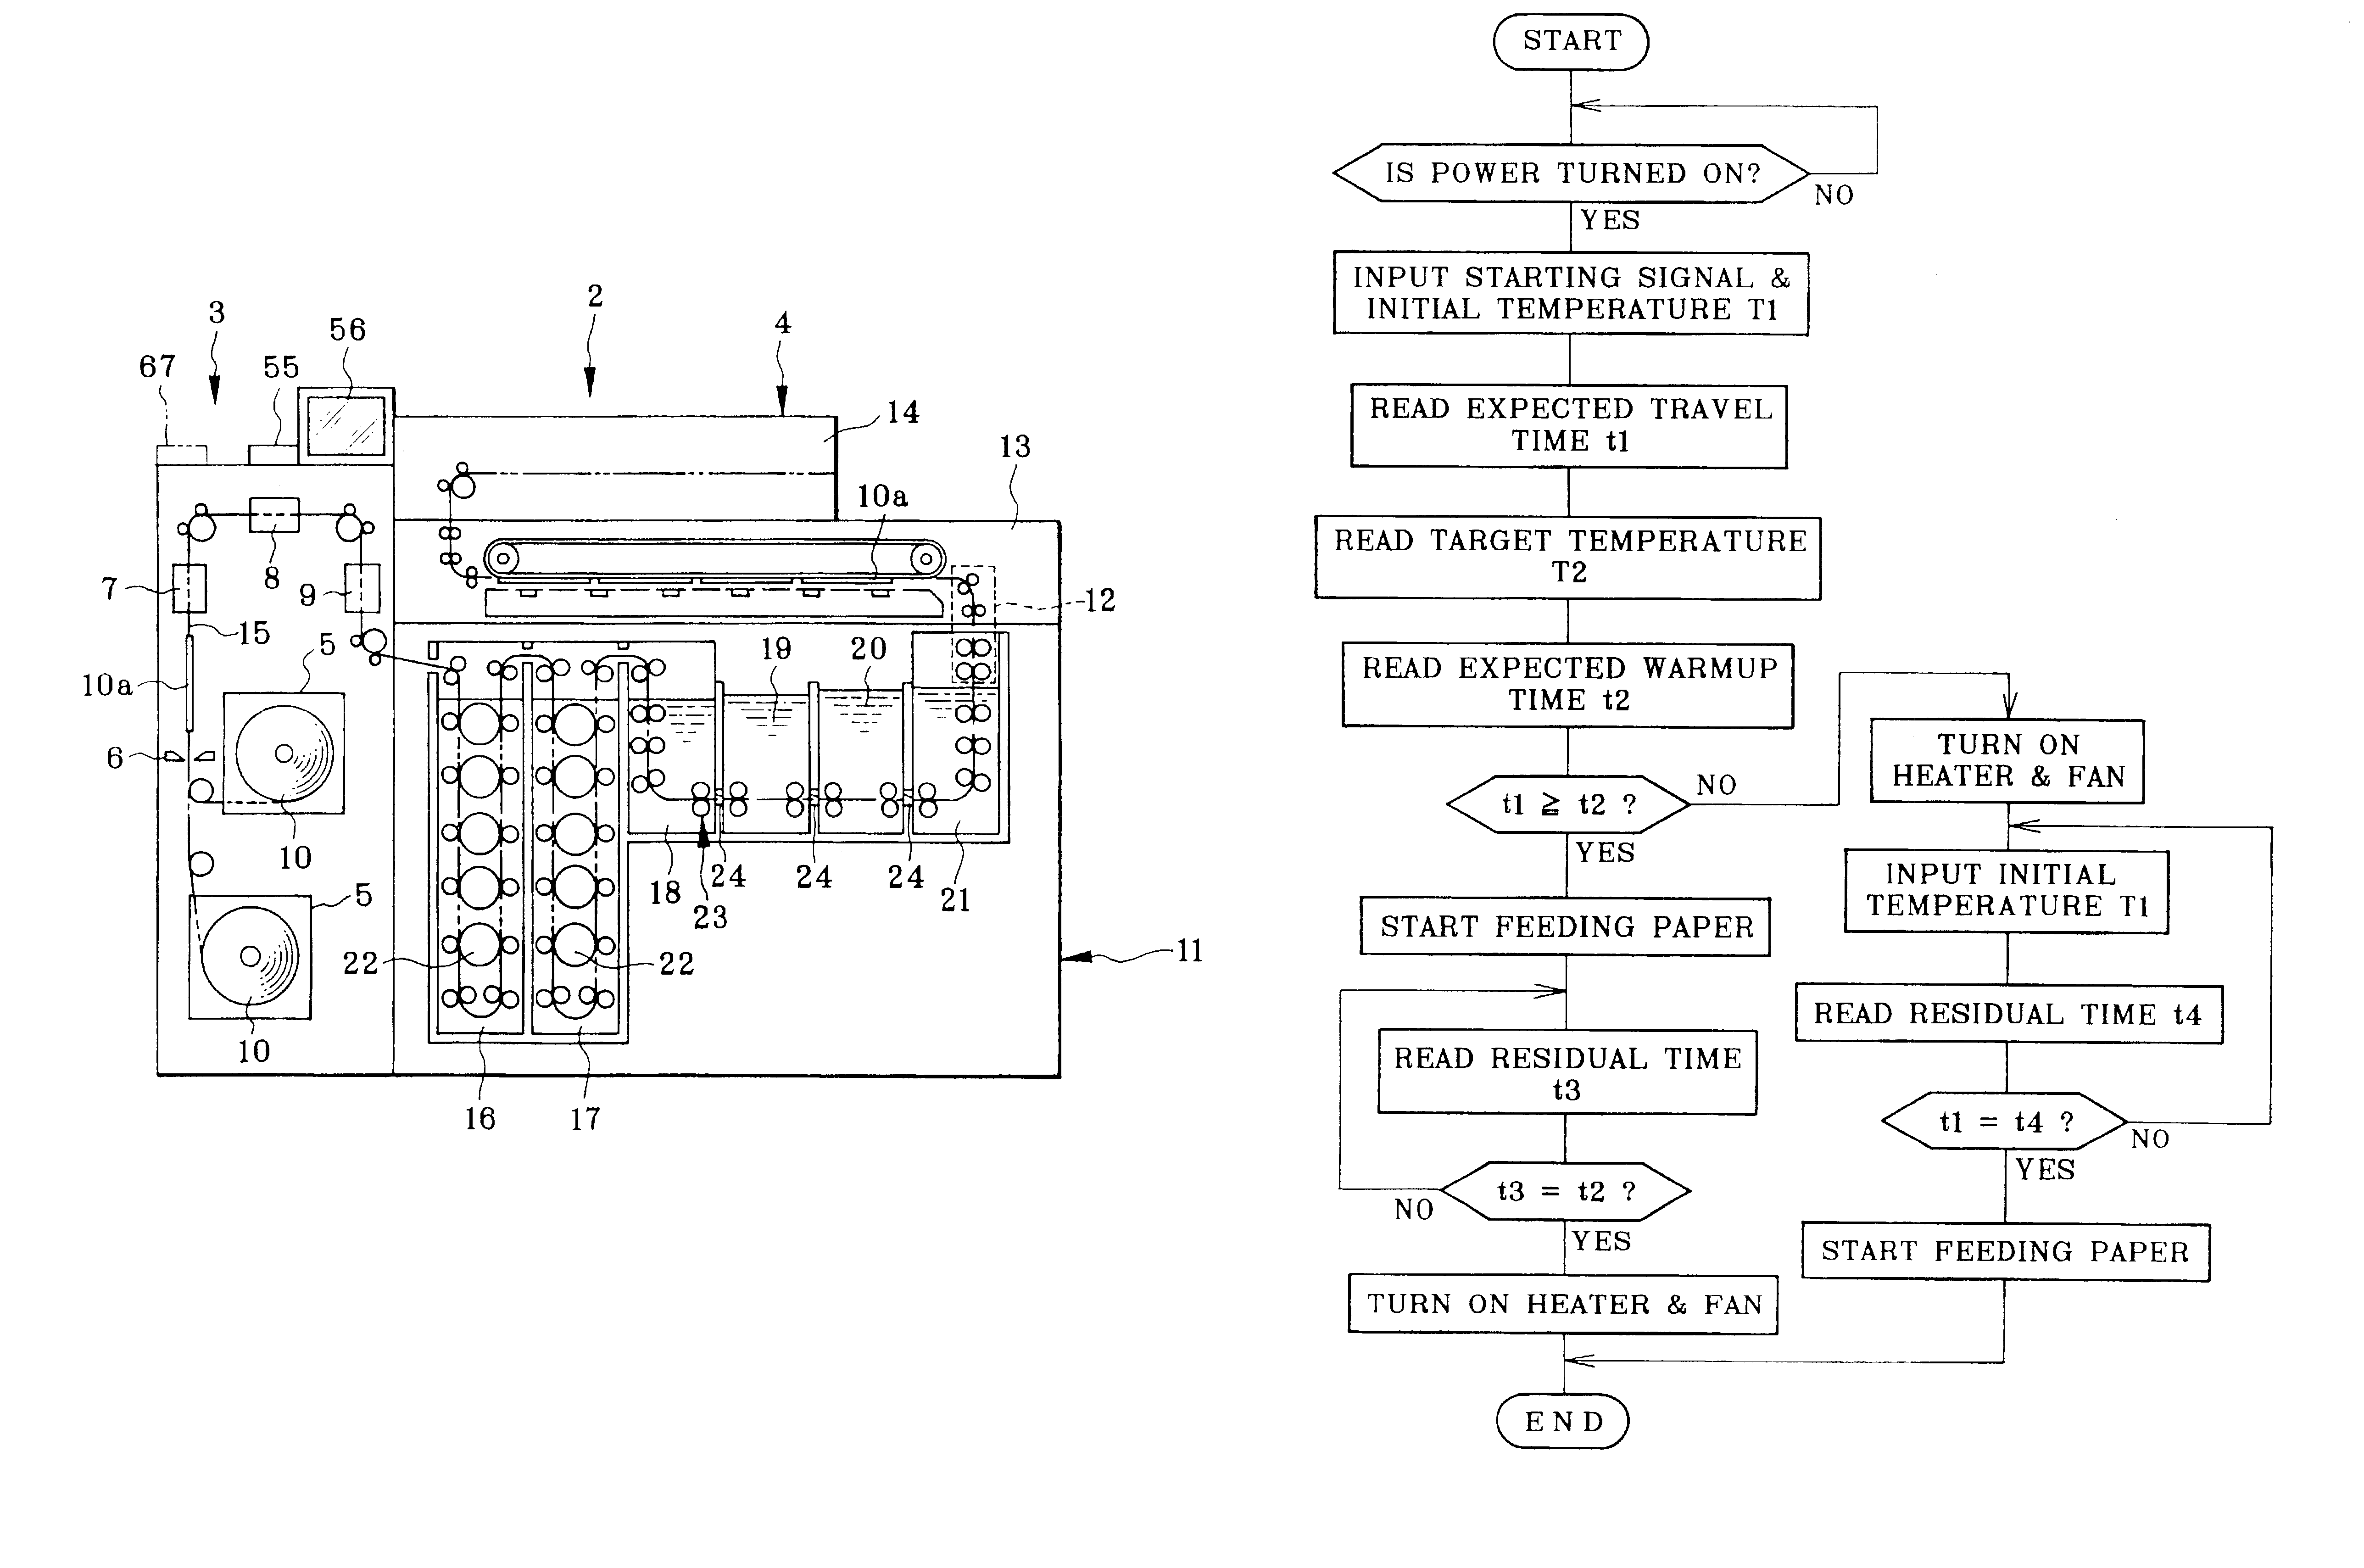 Photographic processing apparatus for photosensitive material